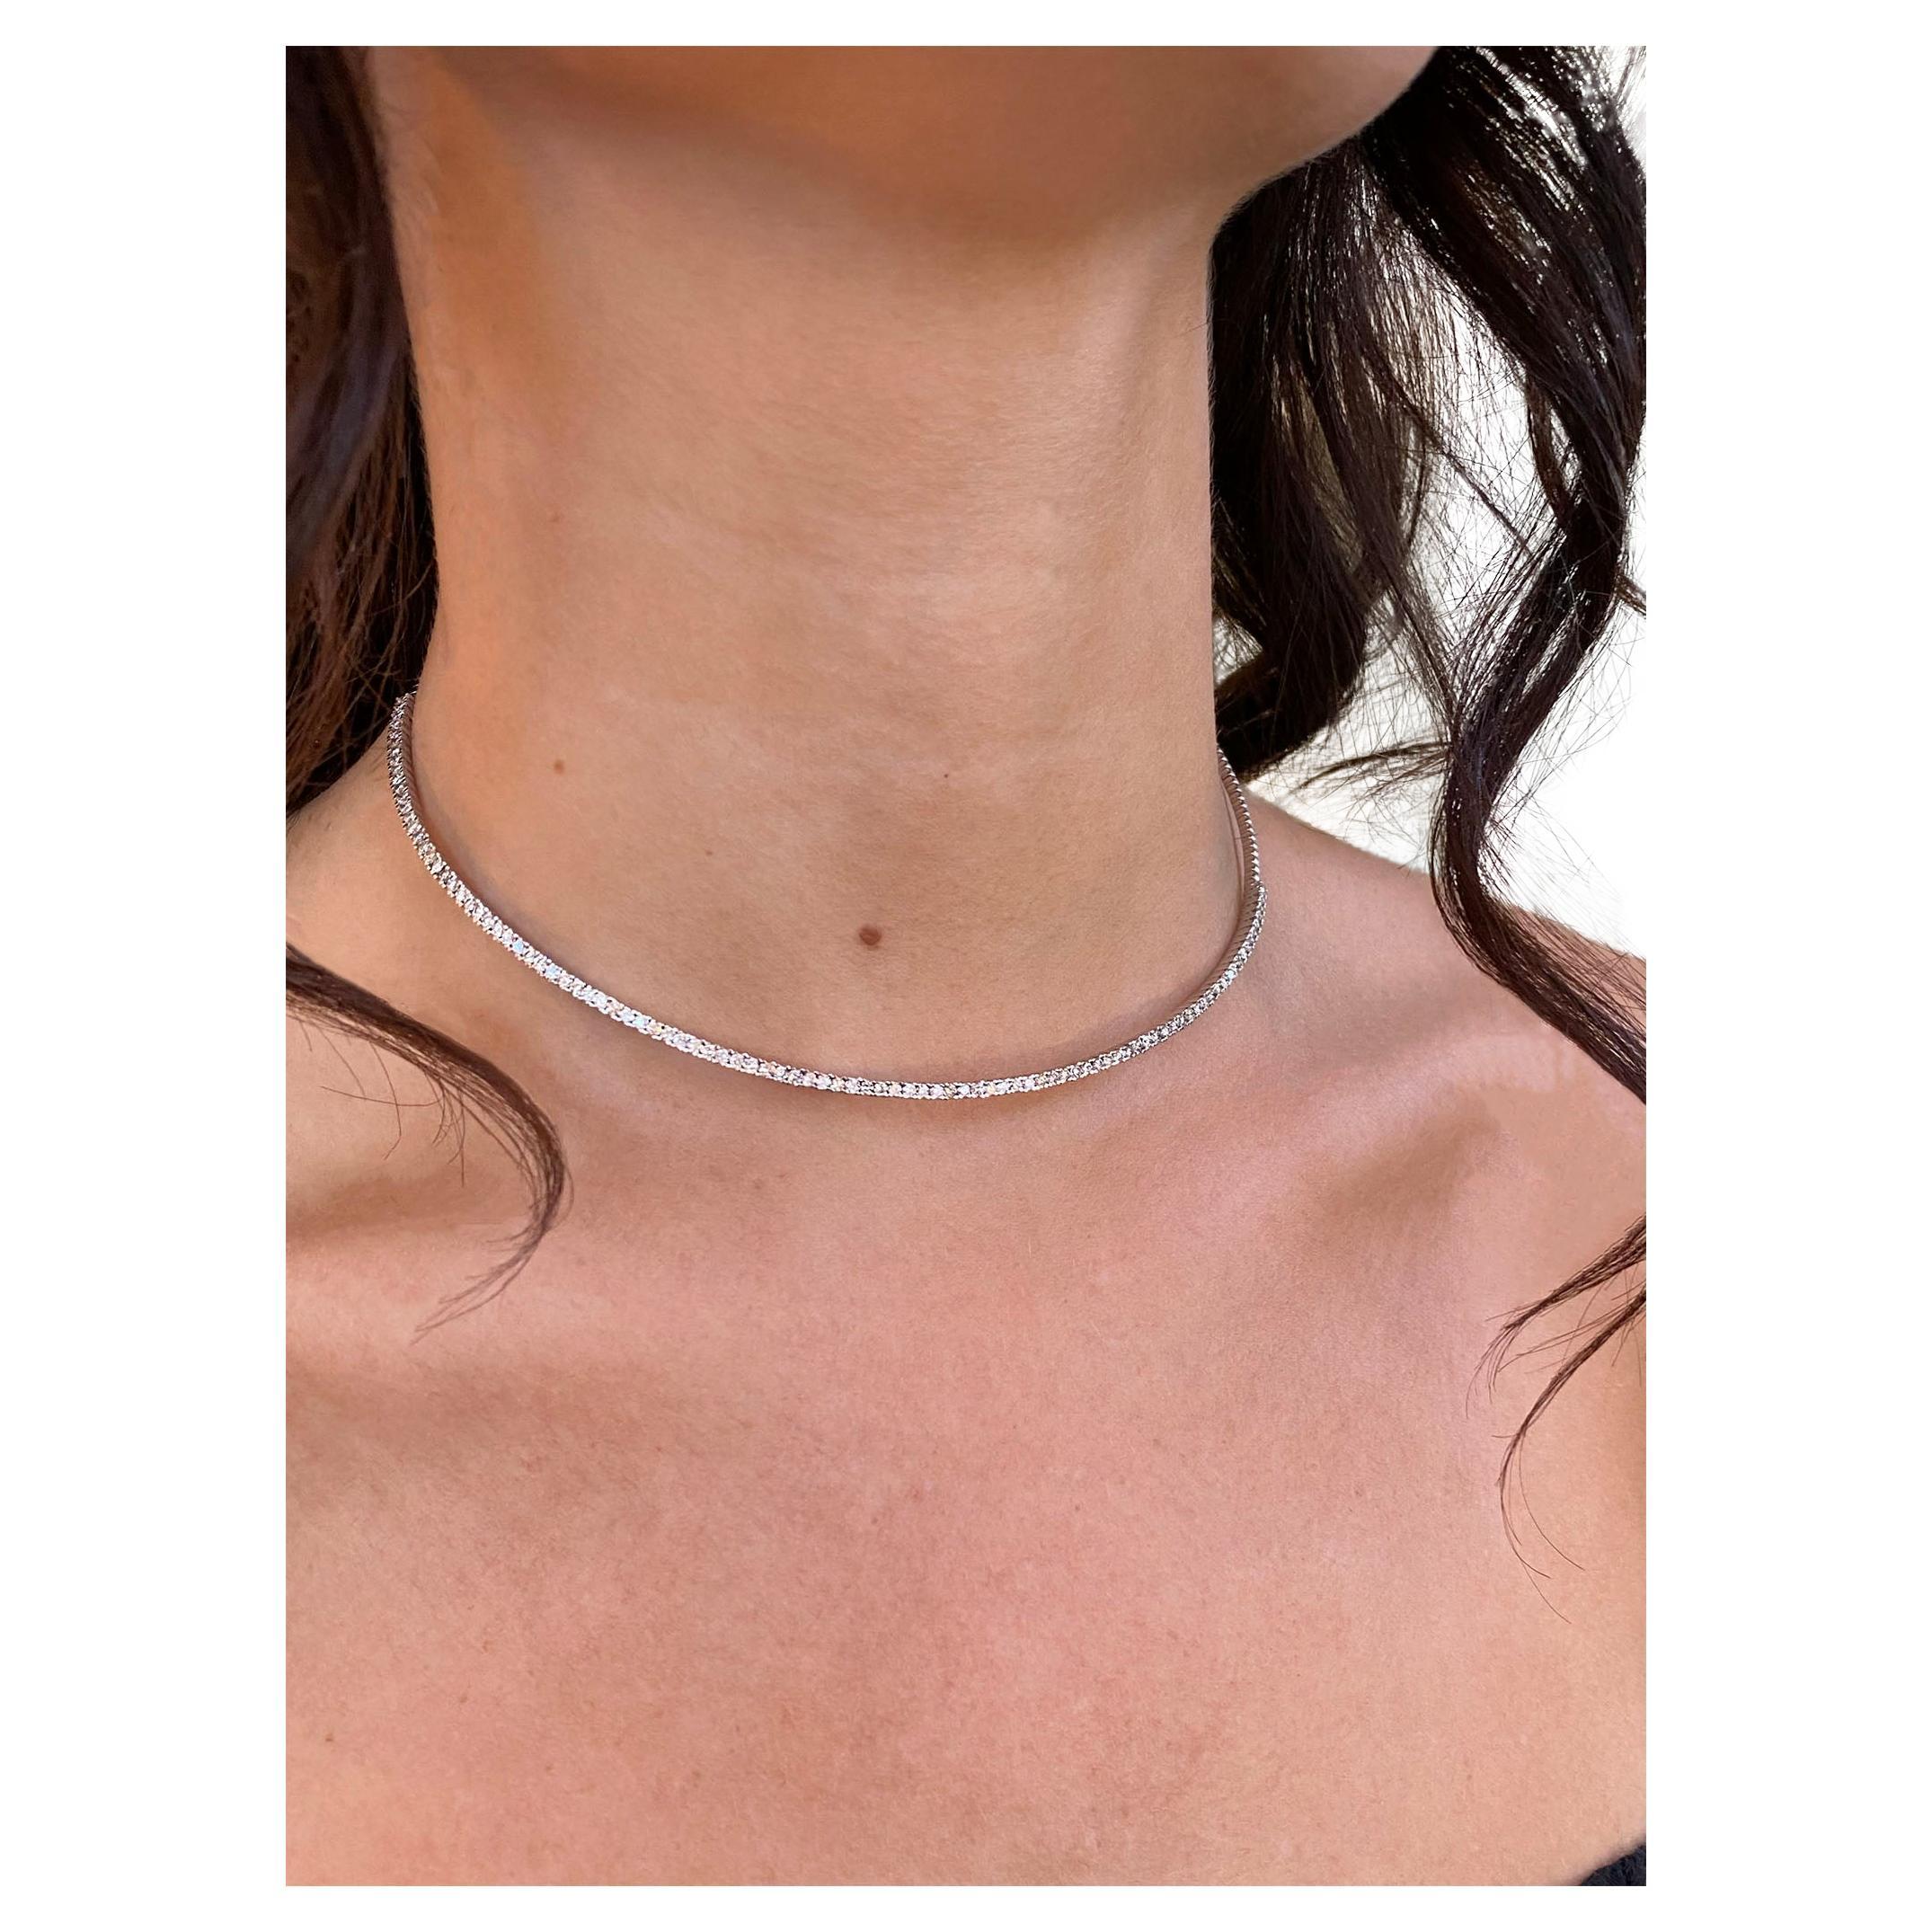 The diamonds are always face-up on this flexible diamond collar. It is a fun and modern take on a traditional tennis necklace with its smart and sexy design. 

All of the carat weight is in the front half of the necklace. Diamonds are meant to be